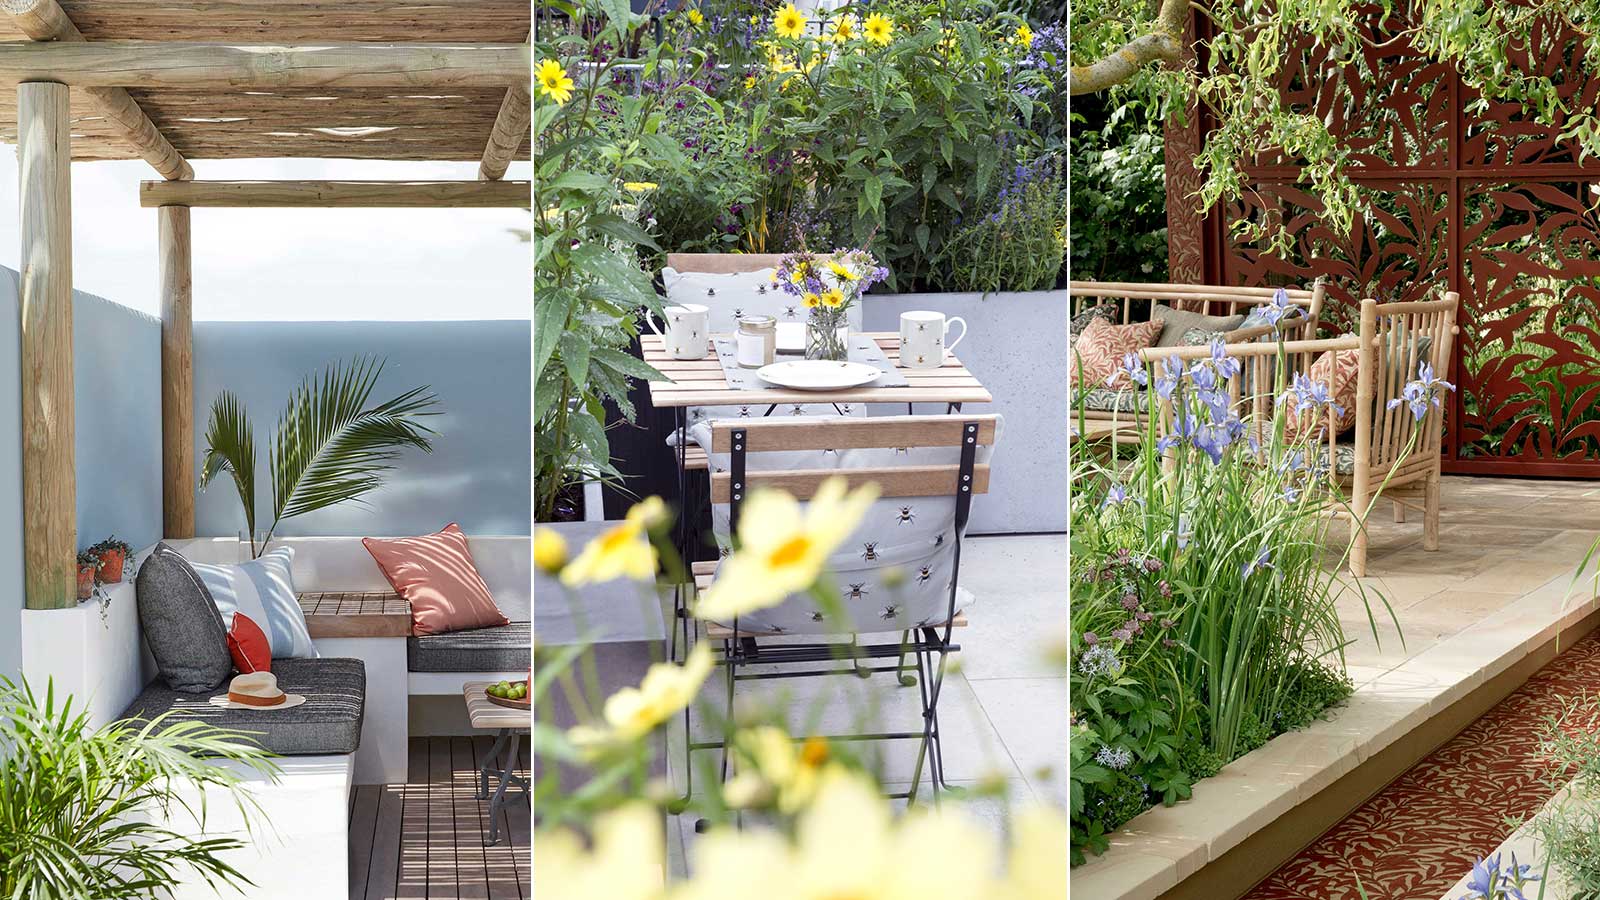 Patio Privacy Ideas: 11 Looks For A Private Outdoor Oasis |